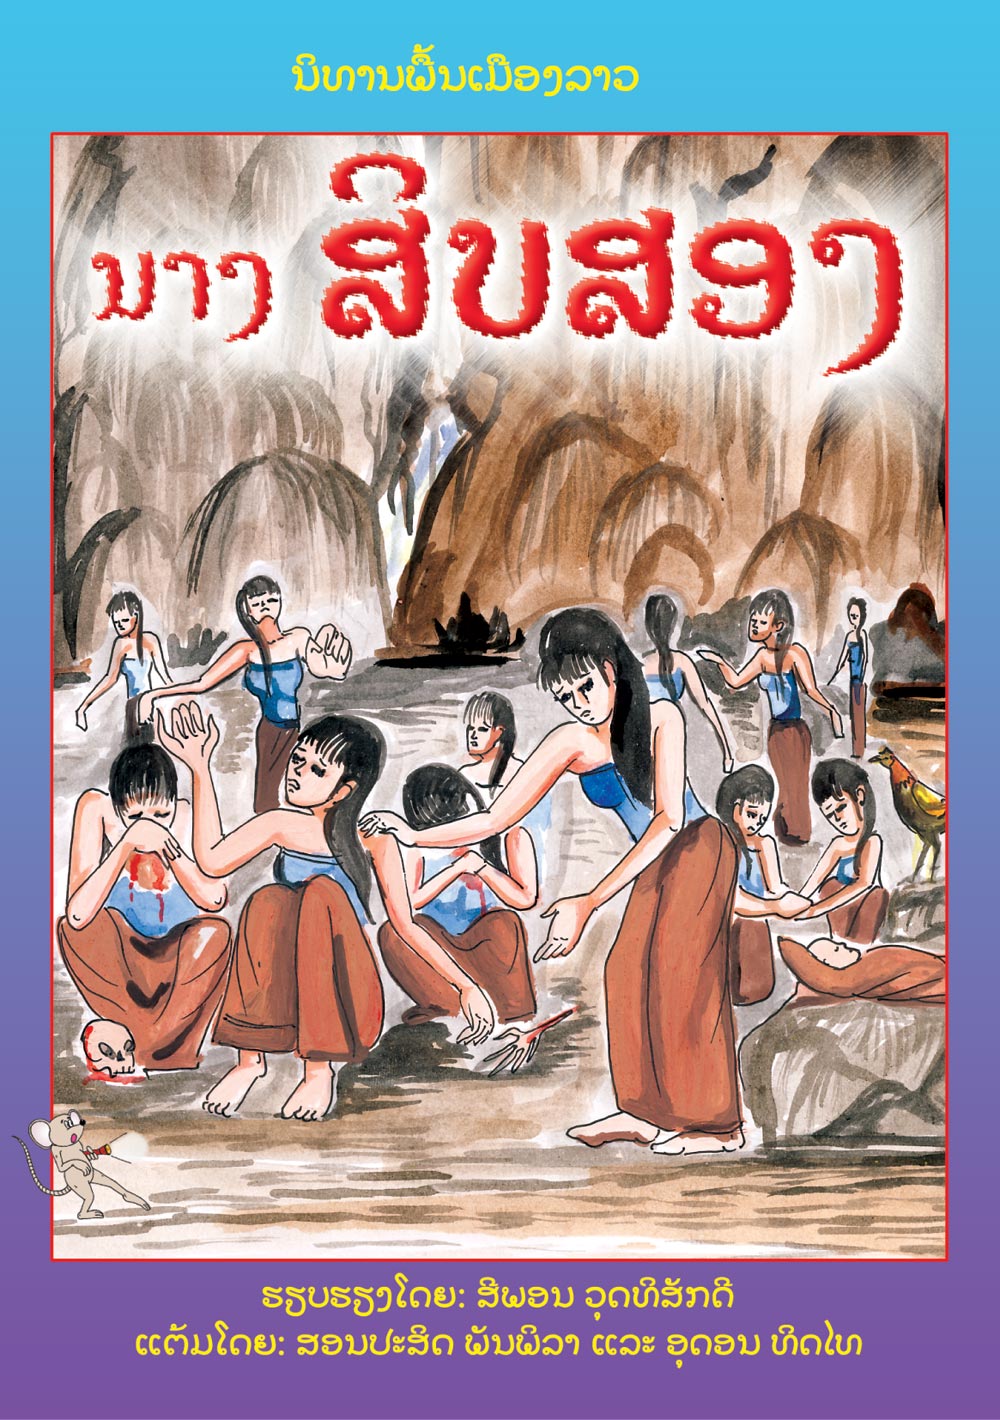 Nang Sipsong large book cover, published in Lao language